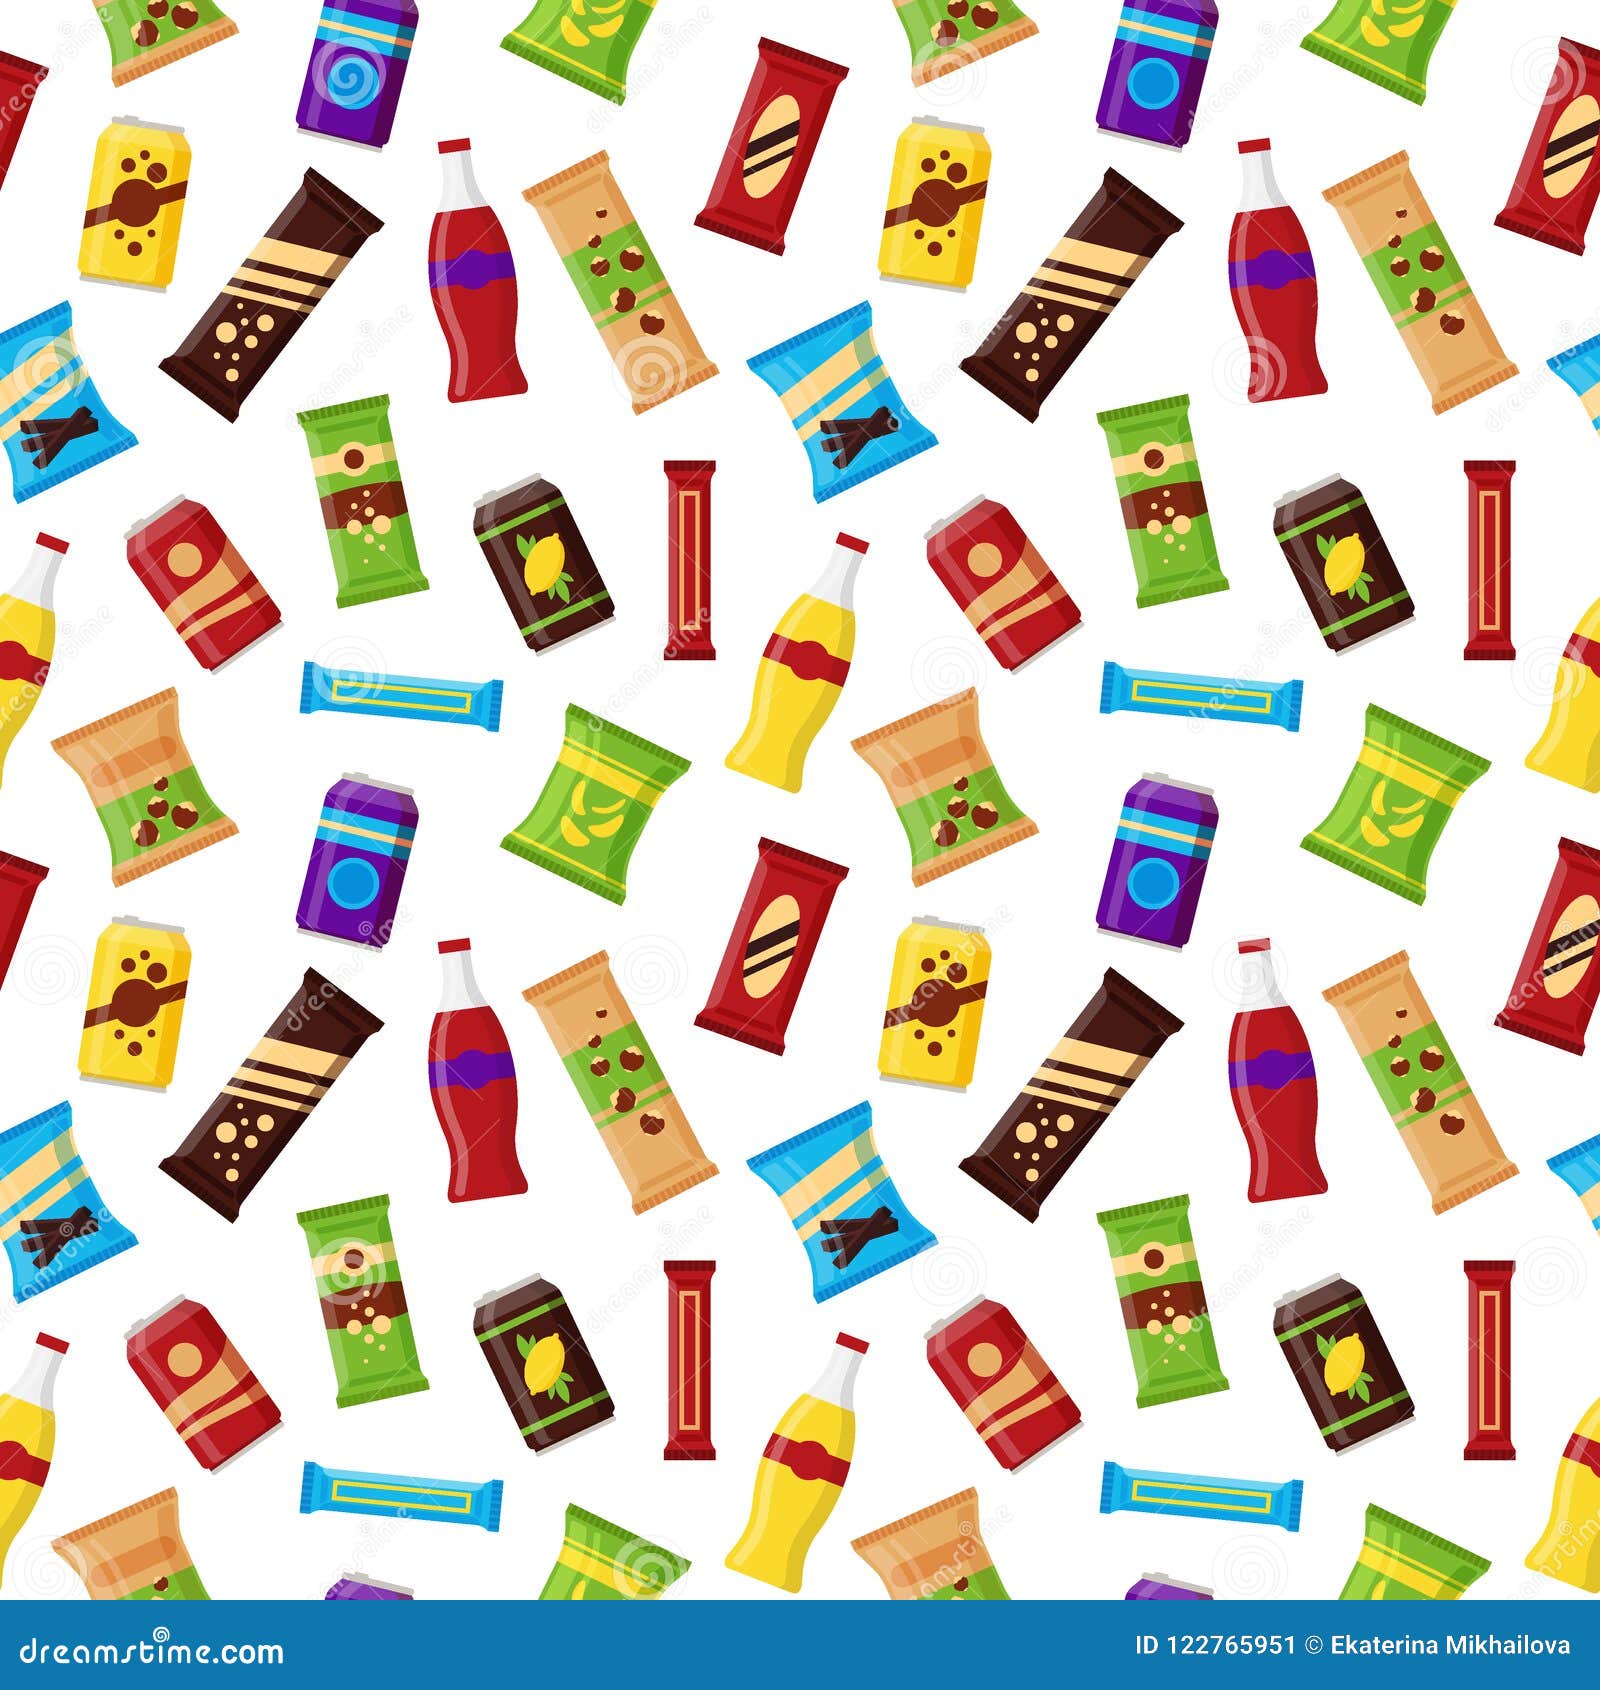 seamless pattern snack product for vending machine. fast food snacks, drinks, nuts, chips, juice for vendor machine bar